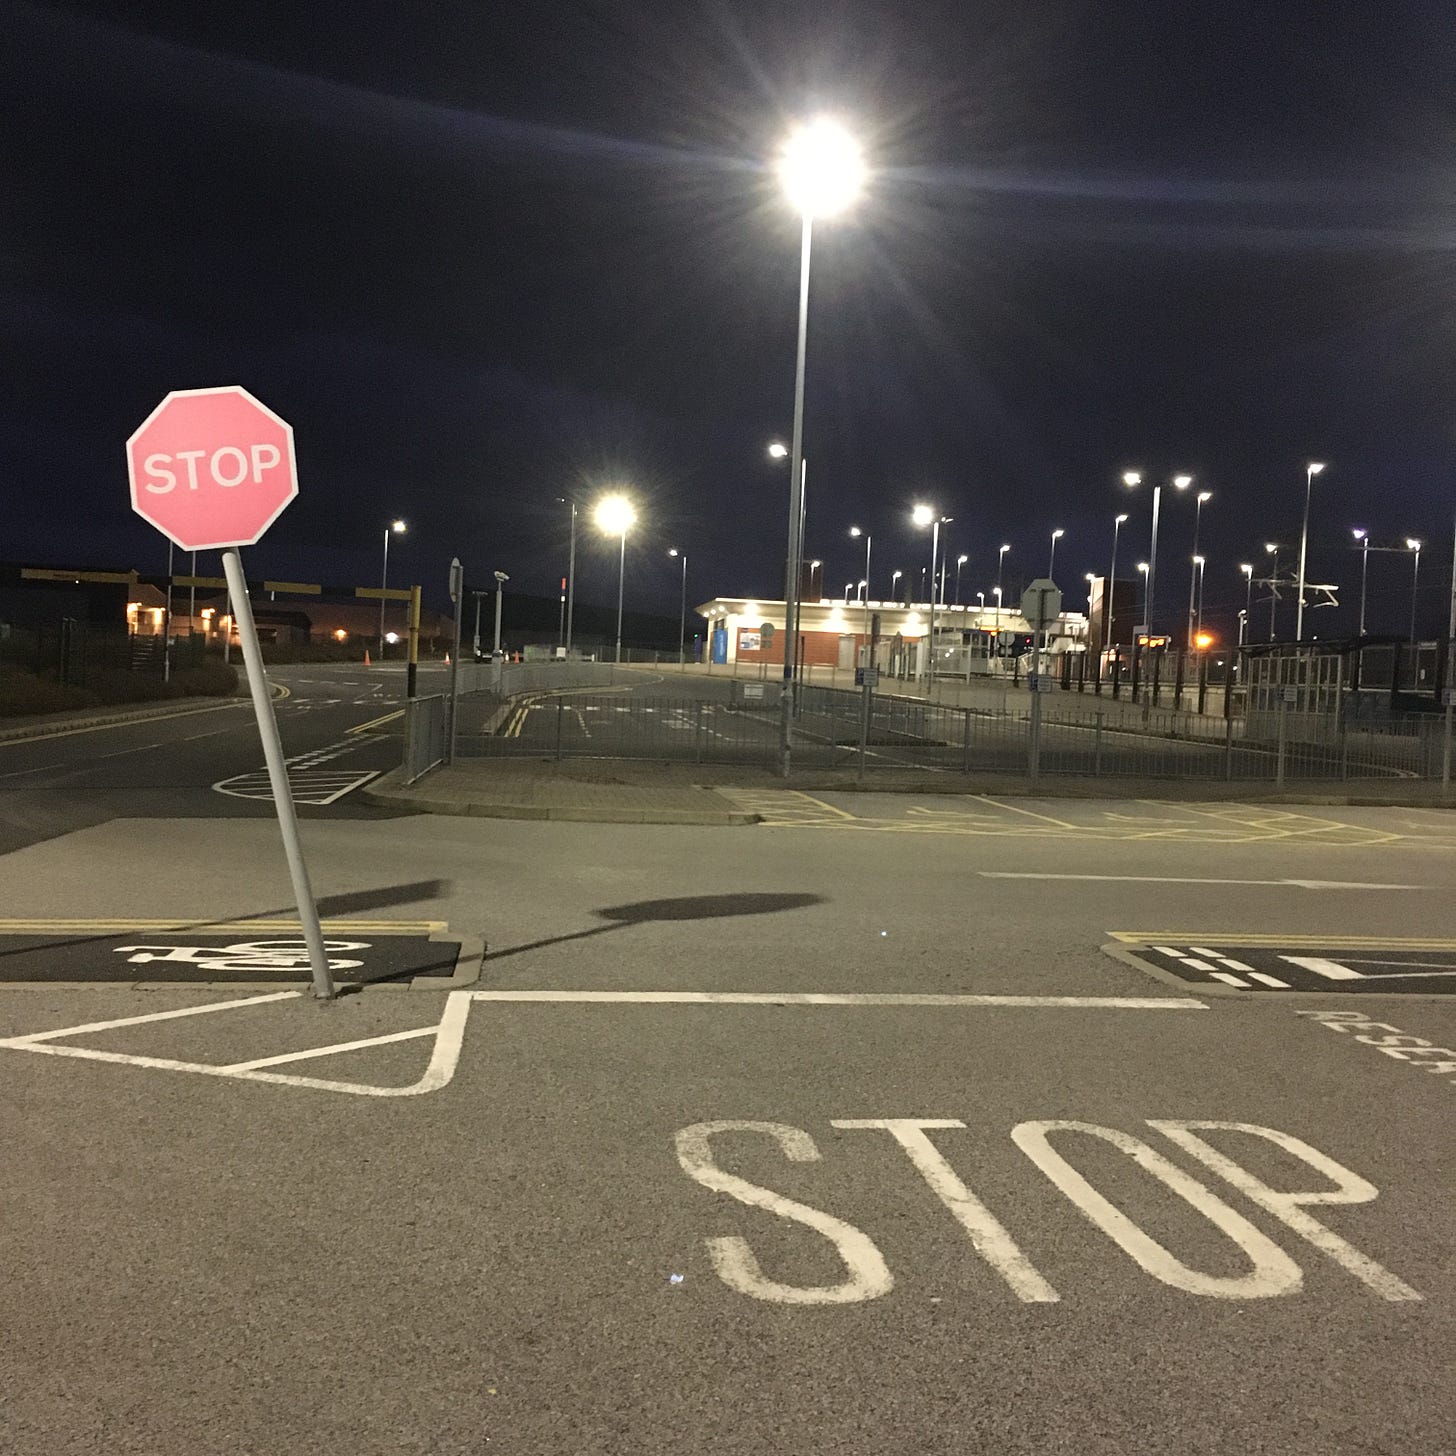 A photo of a carpark at night. There is a red stop sign and STOP is written on the ground